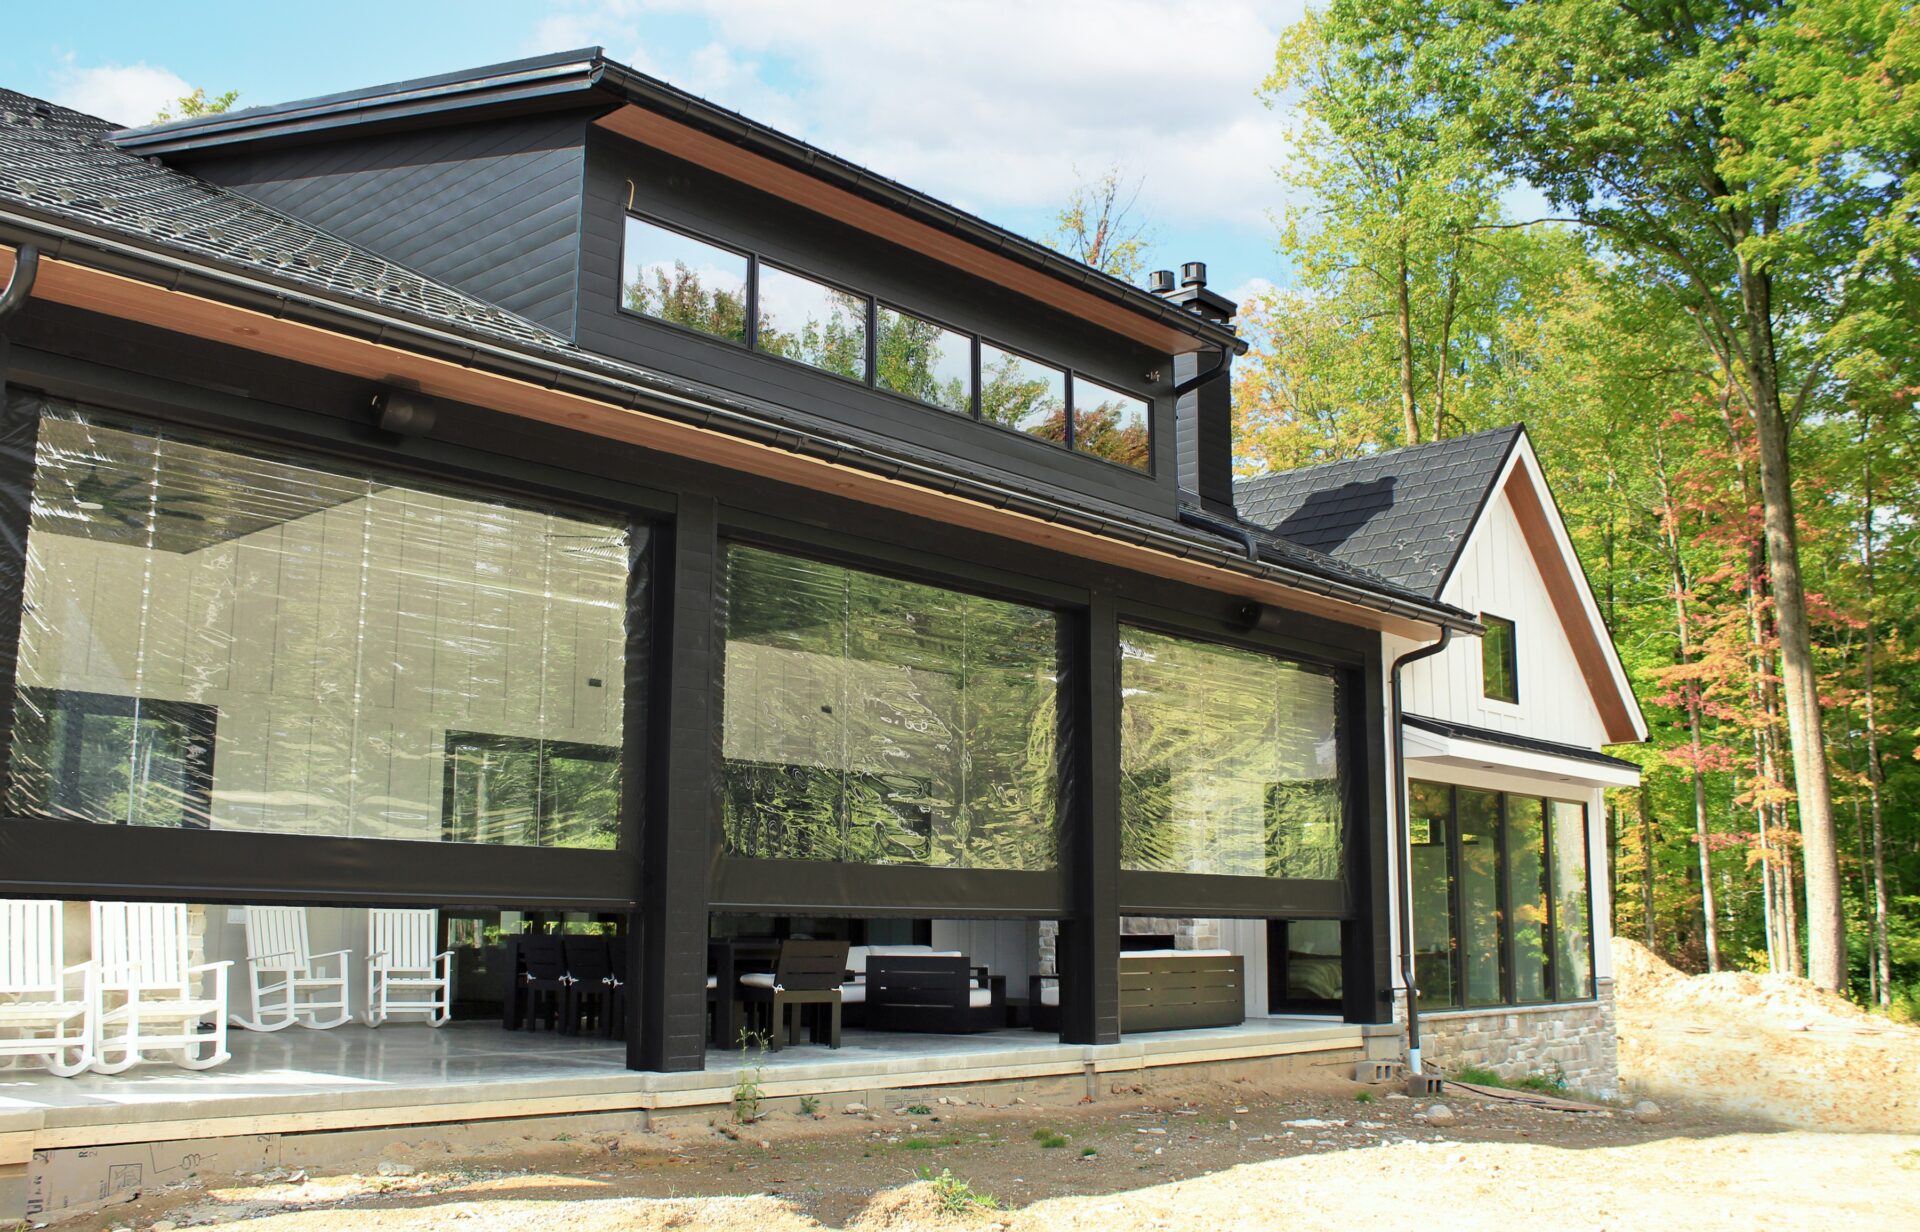 Screening Solutions Ohio transforms this outdoor patio into a four season room with Phantom Retractable Vinyl. With the touch of a button, Phantom’s Clear Vinyl will retain heat while keeping out the elements, allowing you to enjoy your porch all year long.